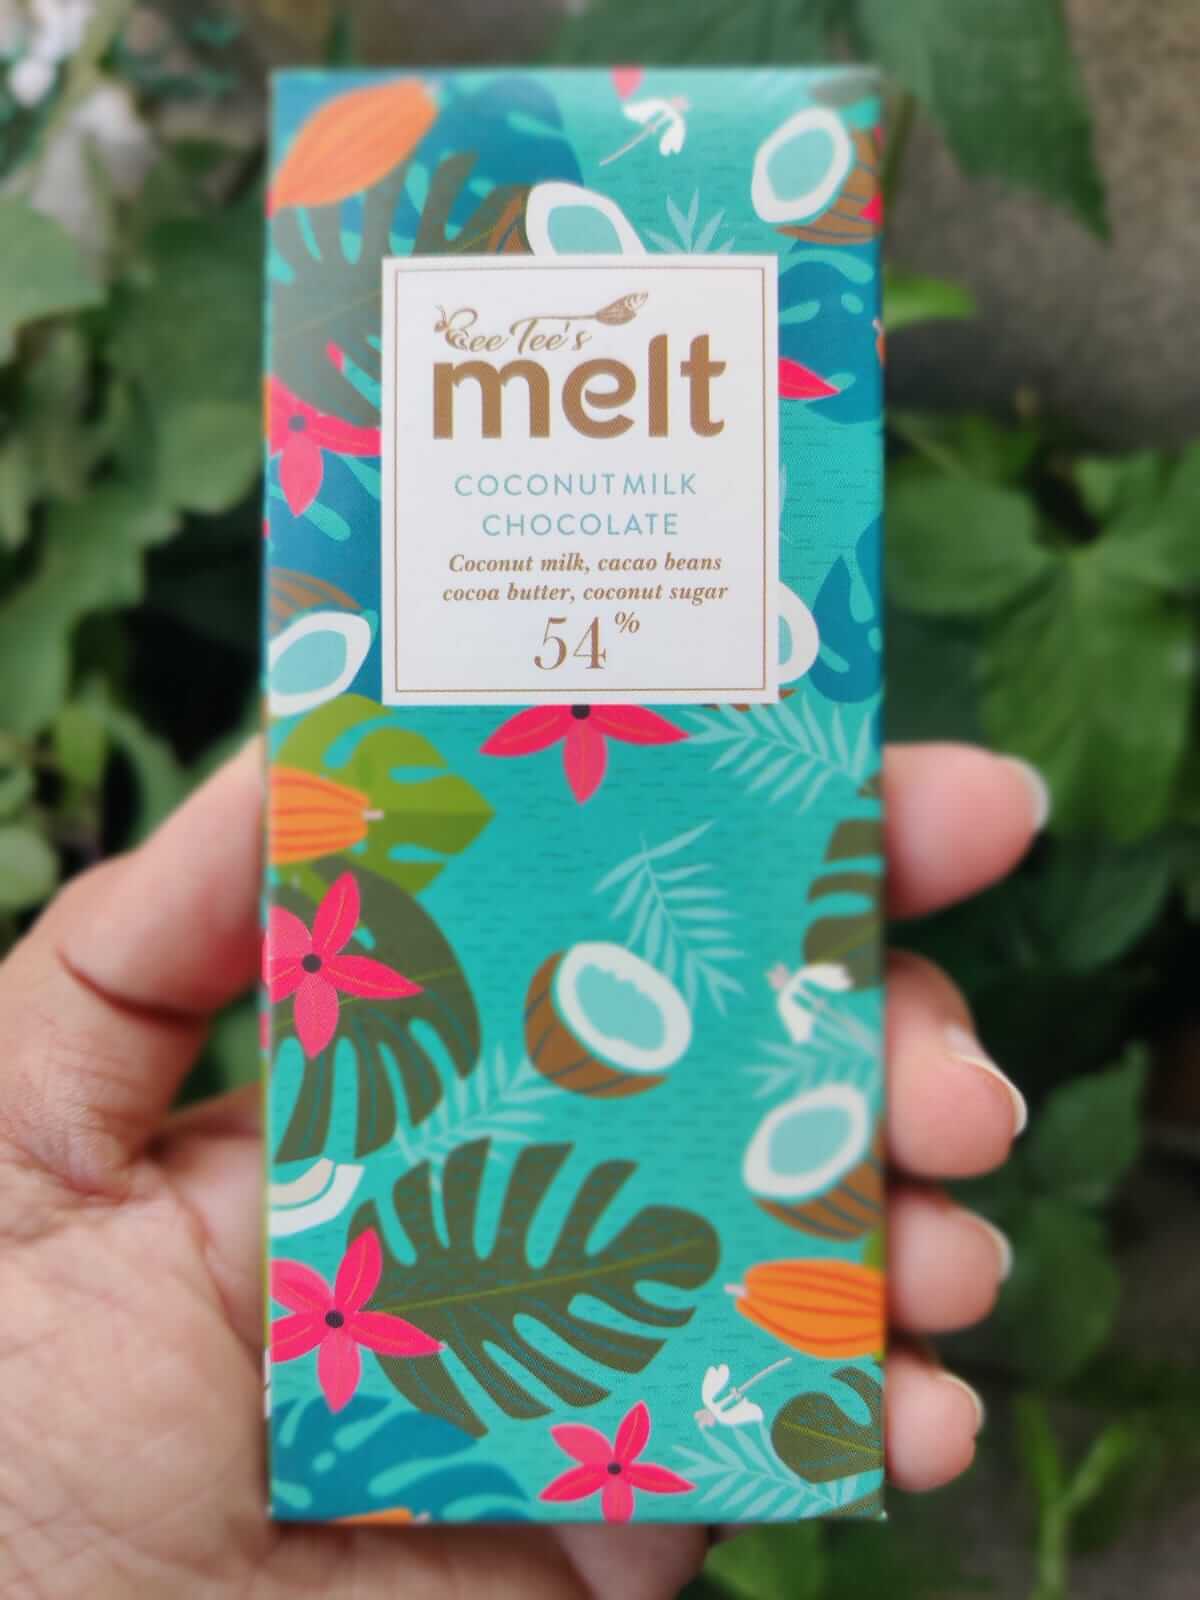 You should check out this sugar-free and vegan chocolate from BeeTee's Melt for Guilt-free indulgence. All their chocolates are free from refined sugar.